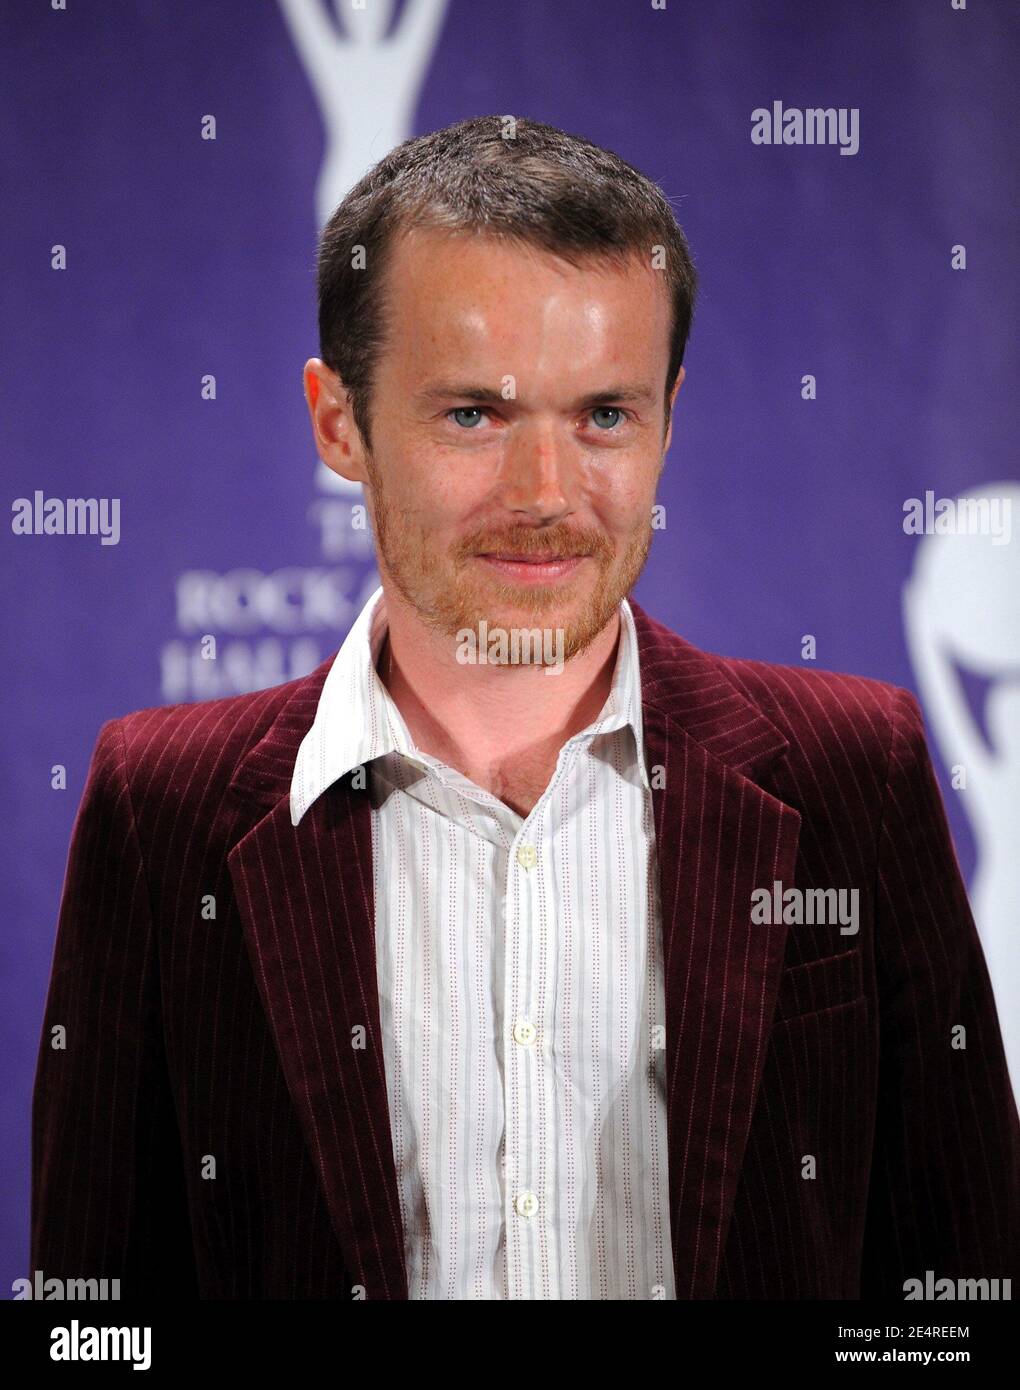 Singer Damien Rice in the press room during the 2008 Rock & Roll Hall of Fame Induction Ceremony, held at the Waldorf-Astoria Hotel in New York City, NY, USA on Monday, March 10, 2008. Photo by David Miller/ABACAPRESS.COM Stock Photo